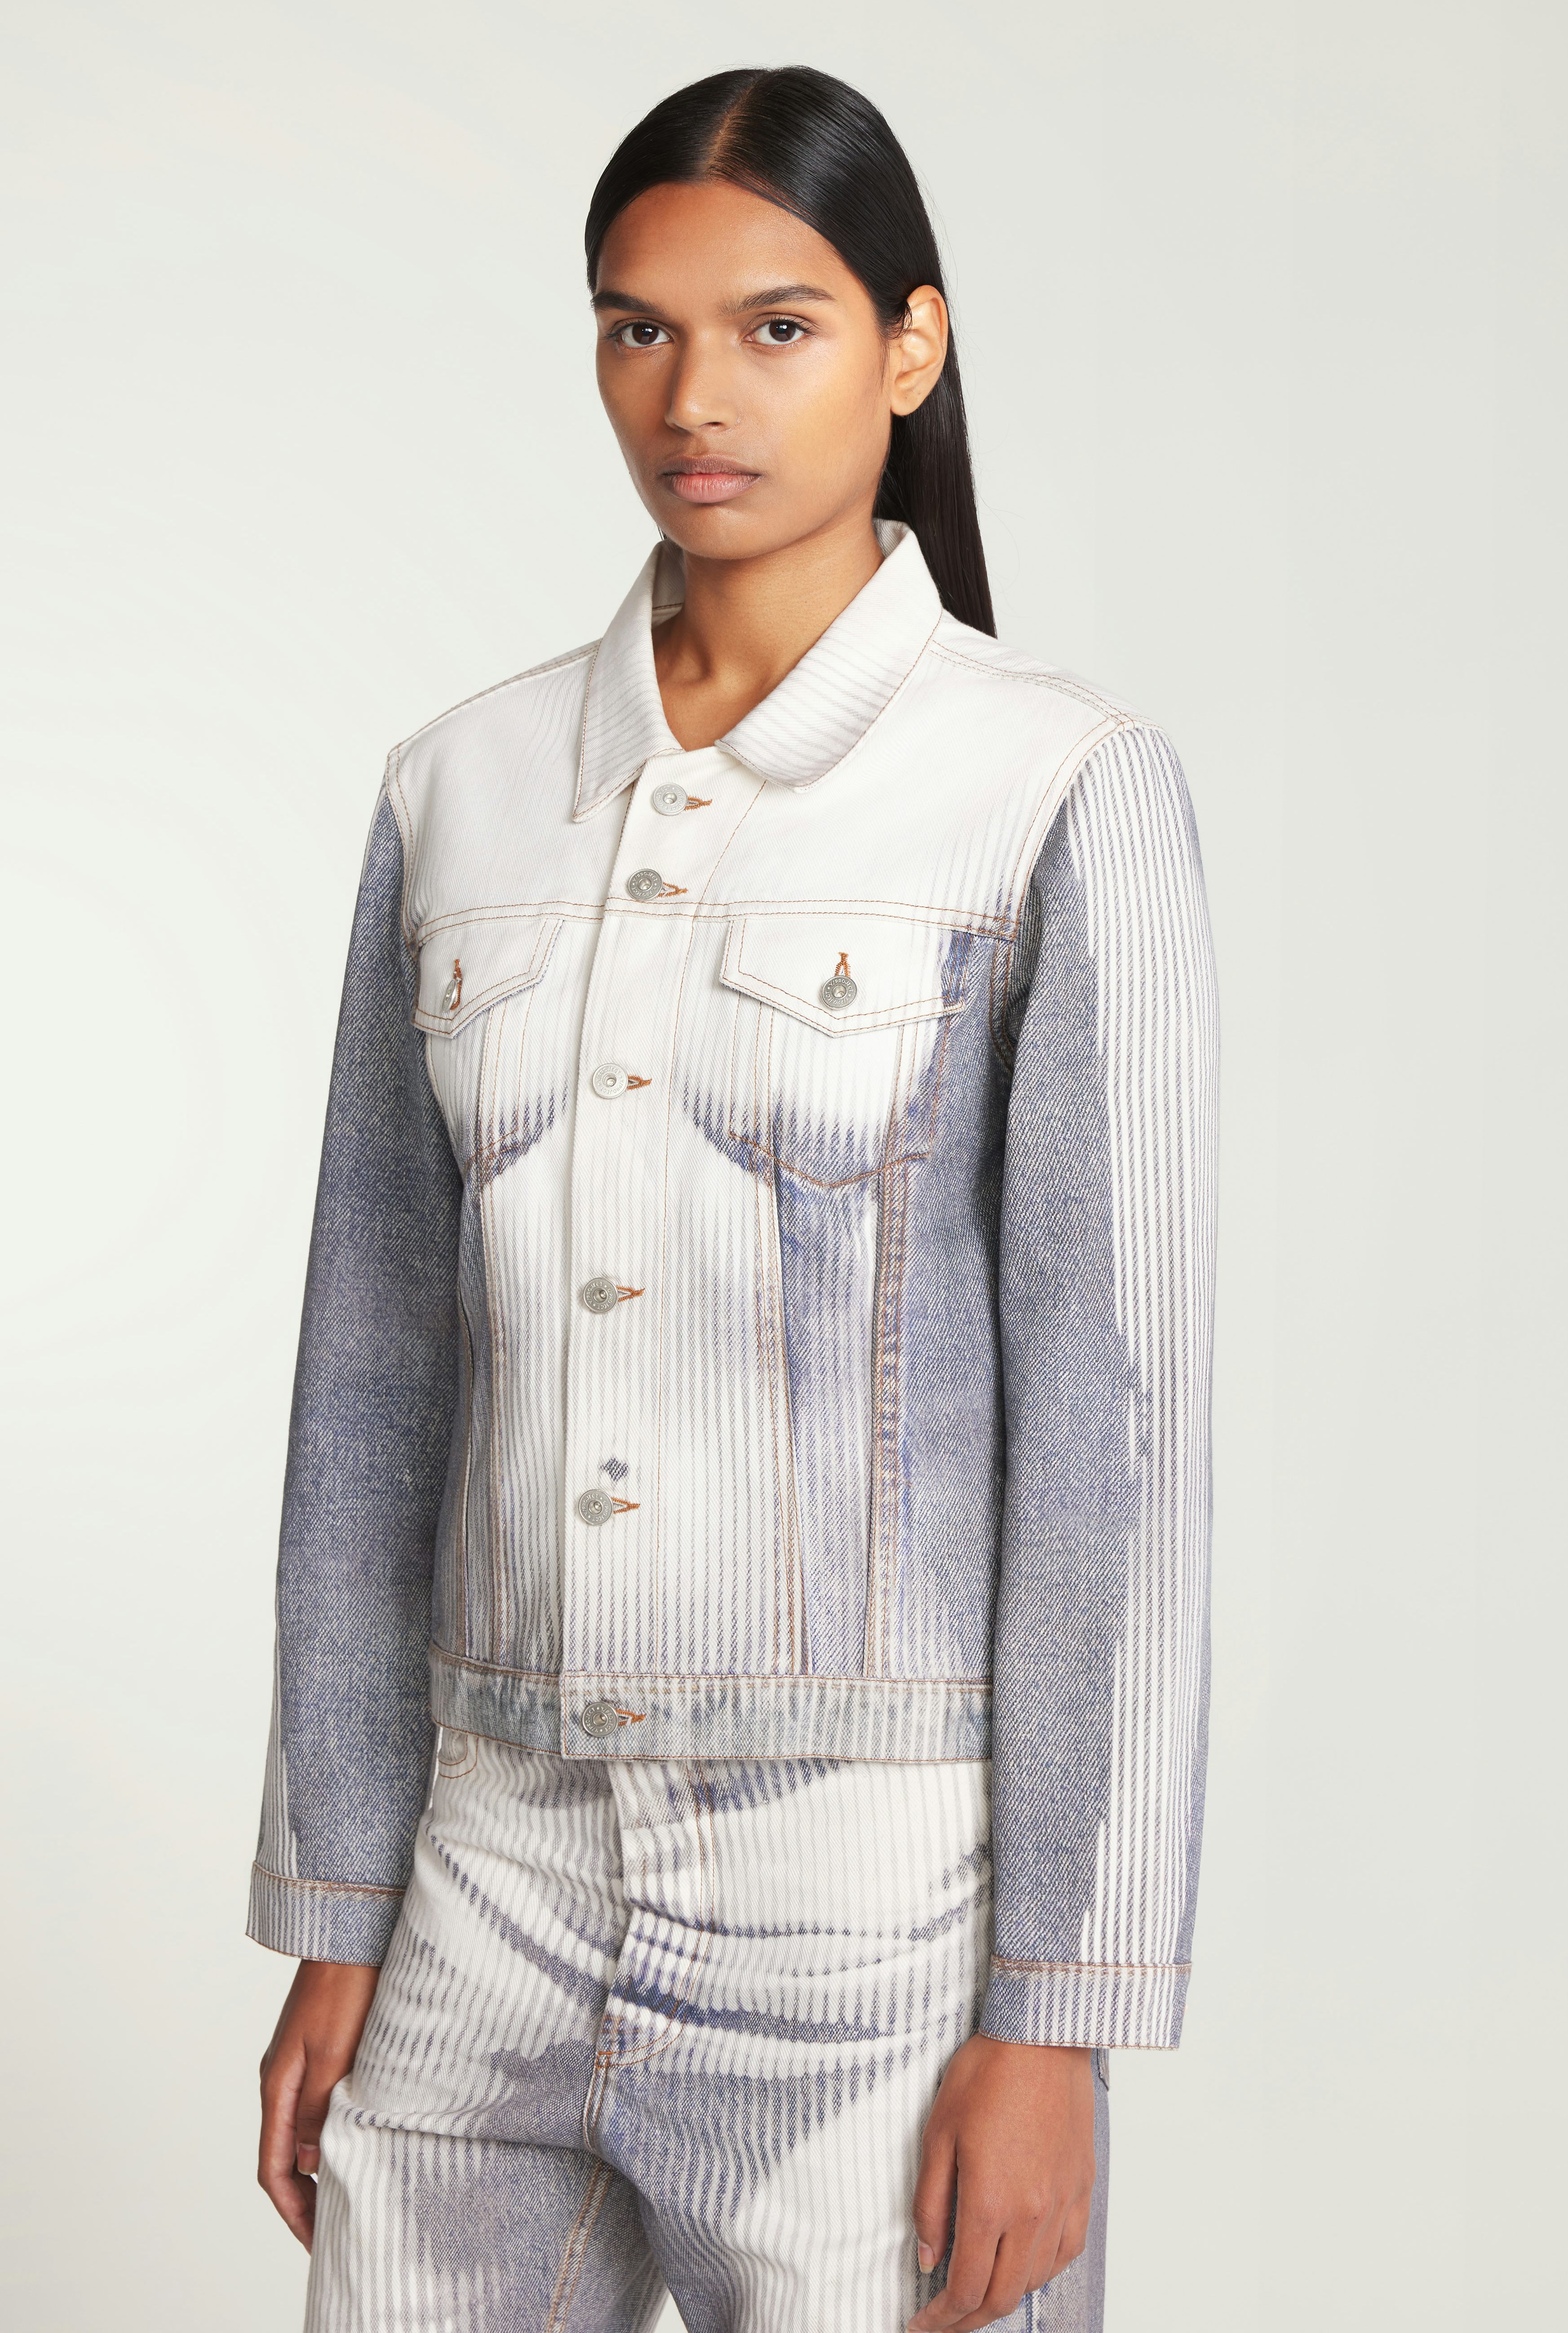 The Blue & White Body Morph Fitted Denim Jacket by Jean Paul Gaultier x Y/Project